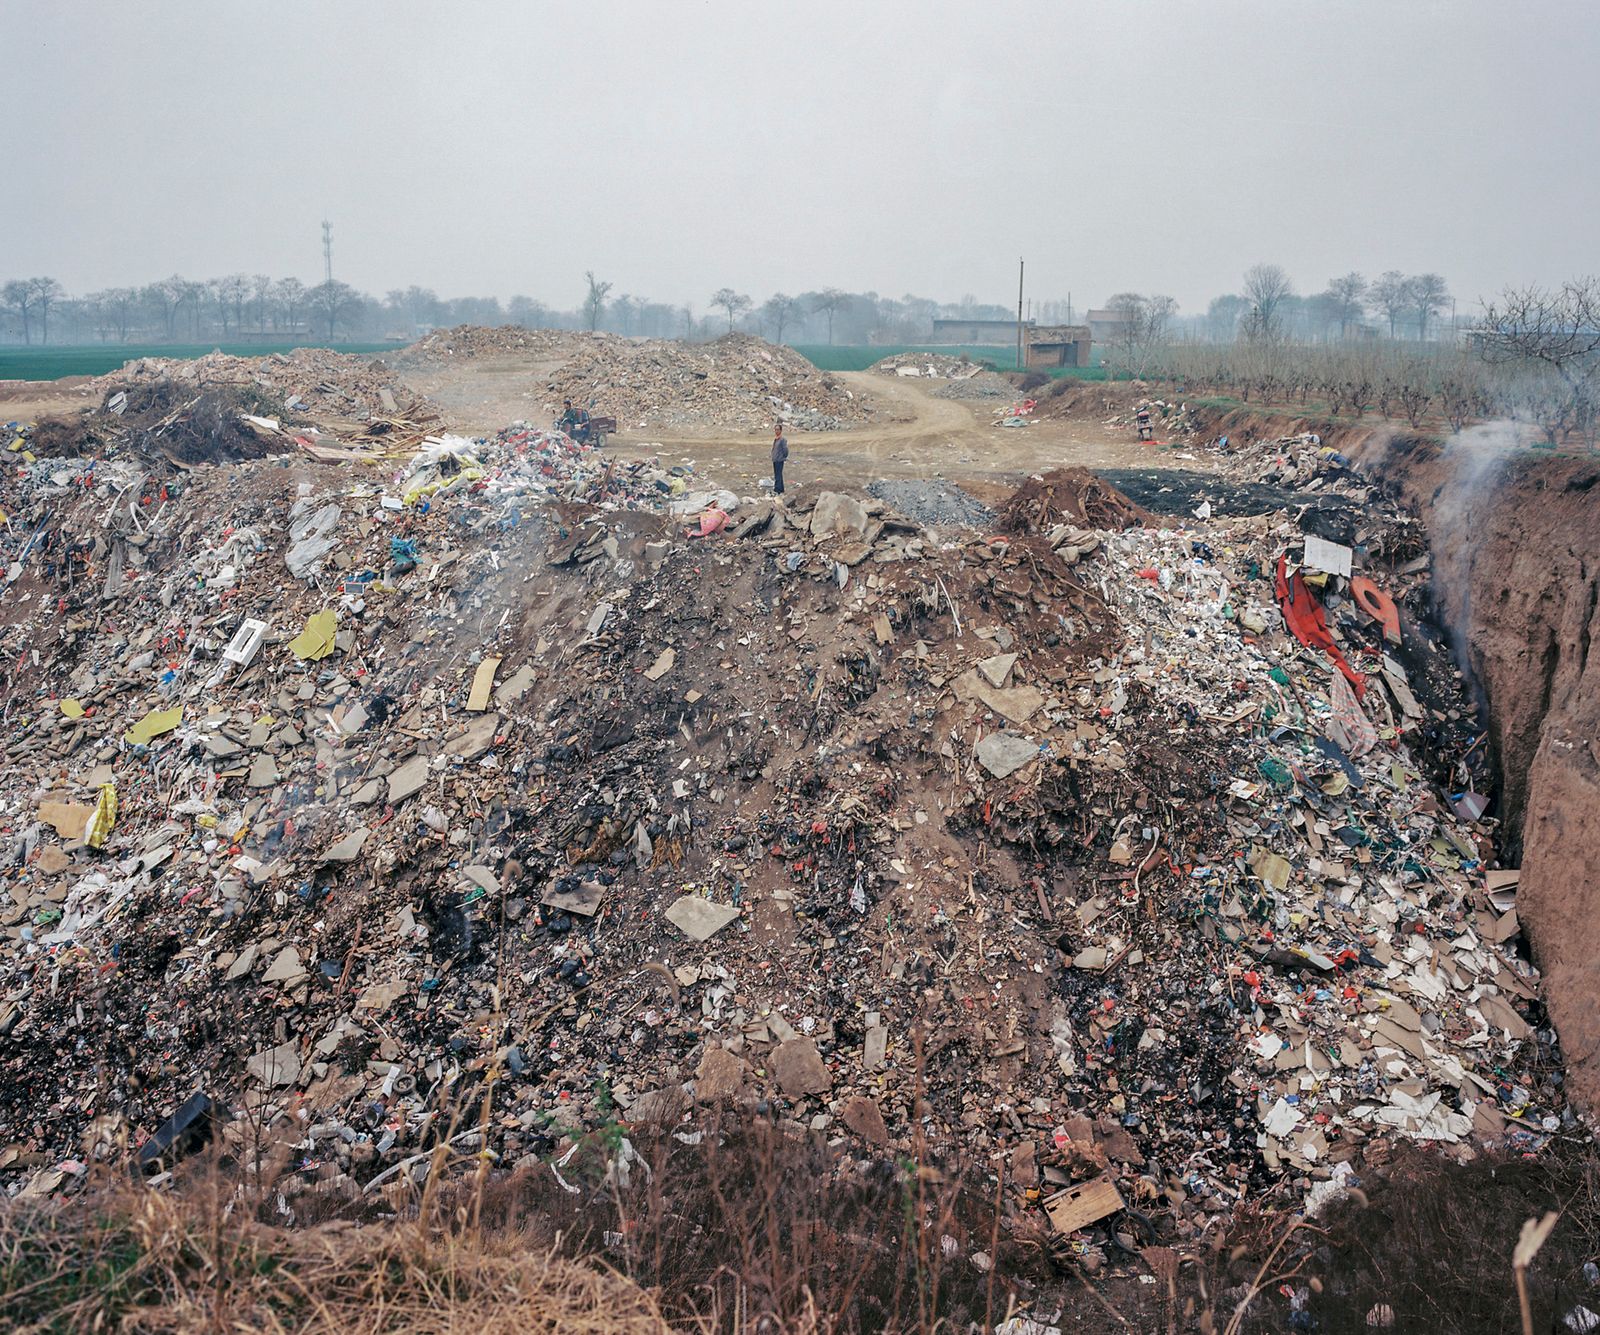 © Pan Wang - 20.The soil is refilled as construction waste into large pits dug by the brick factory